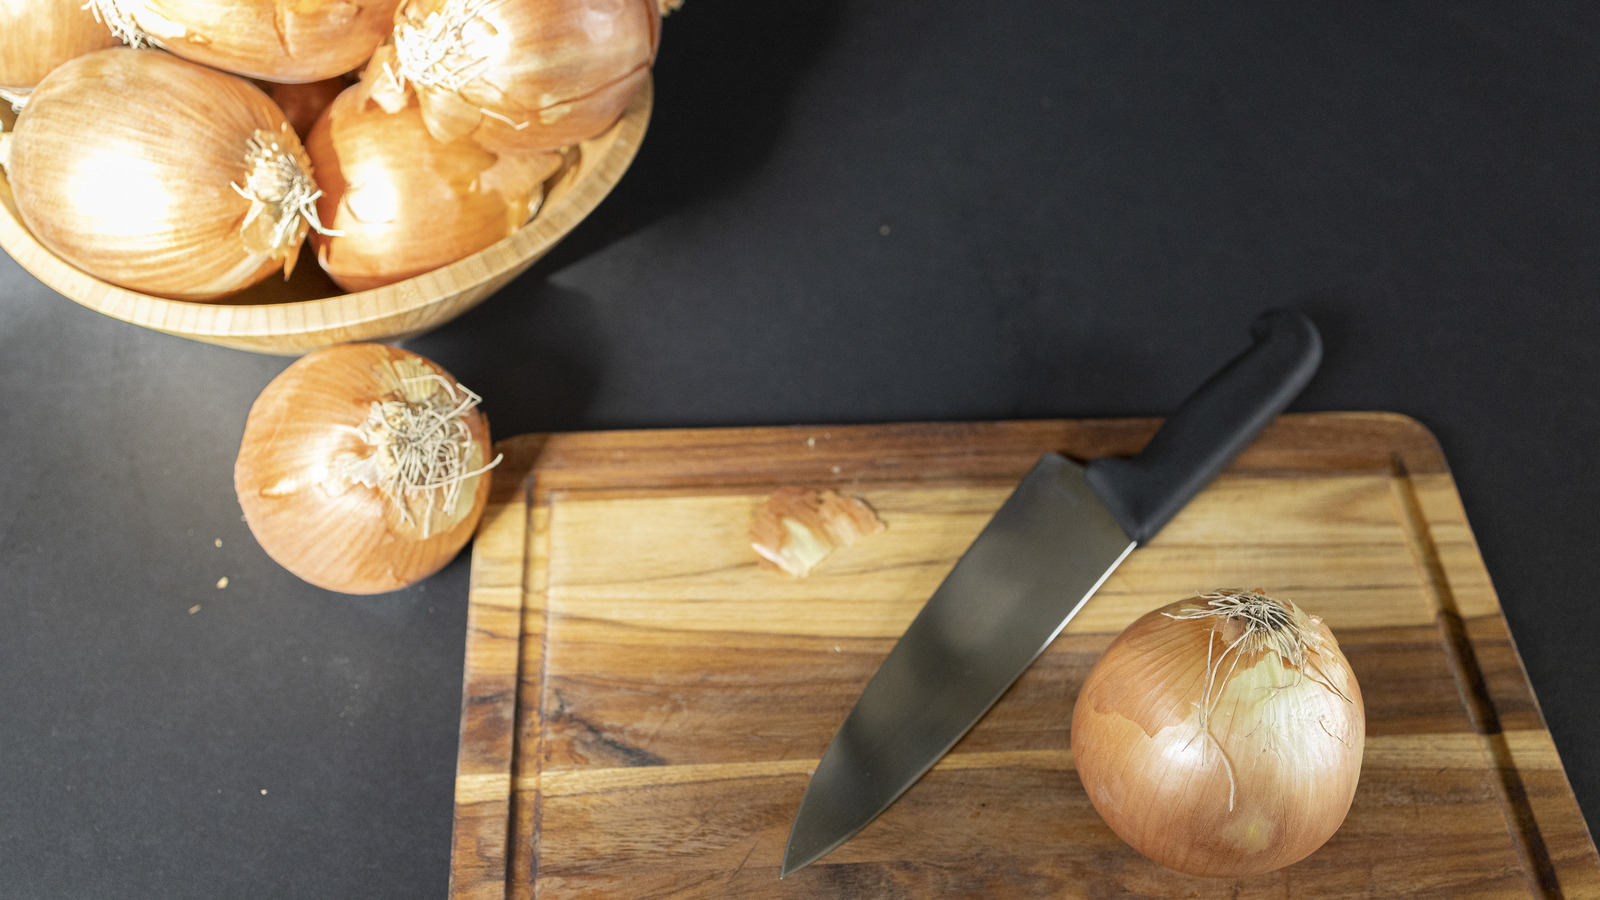 Hack shows no-tears secret to dicing onion in 30 seconds